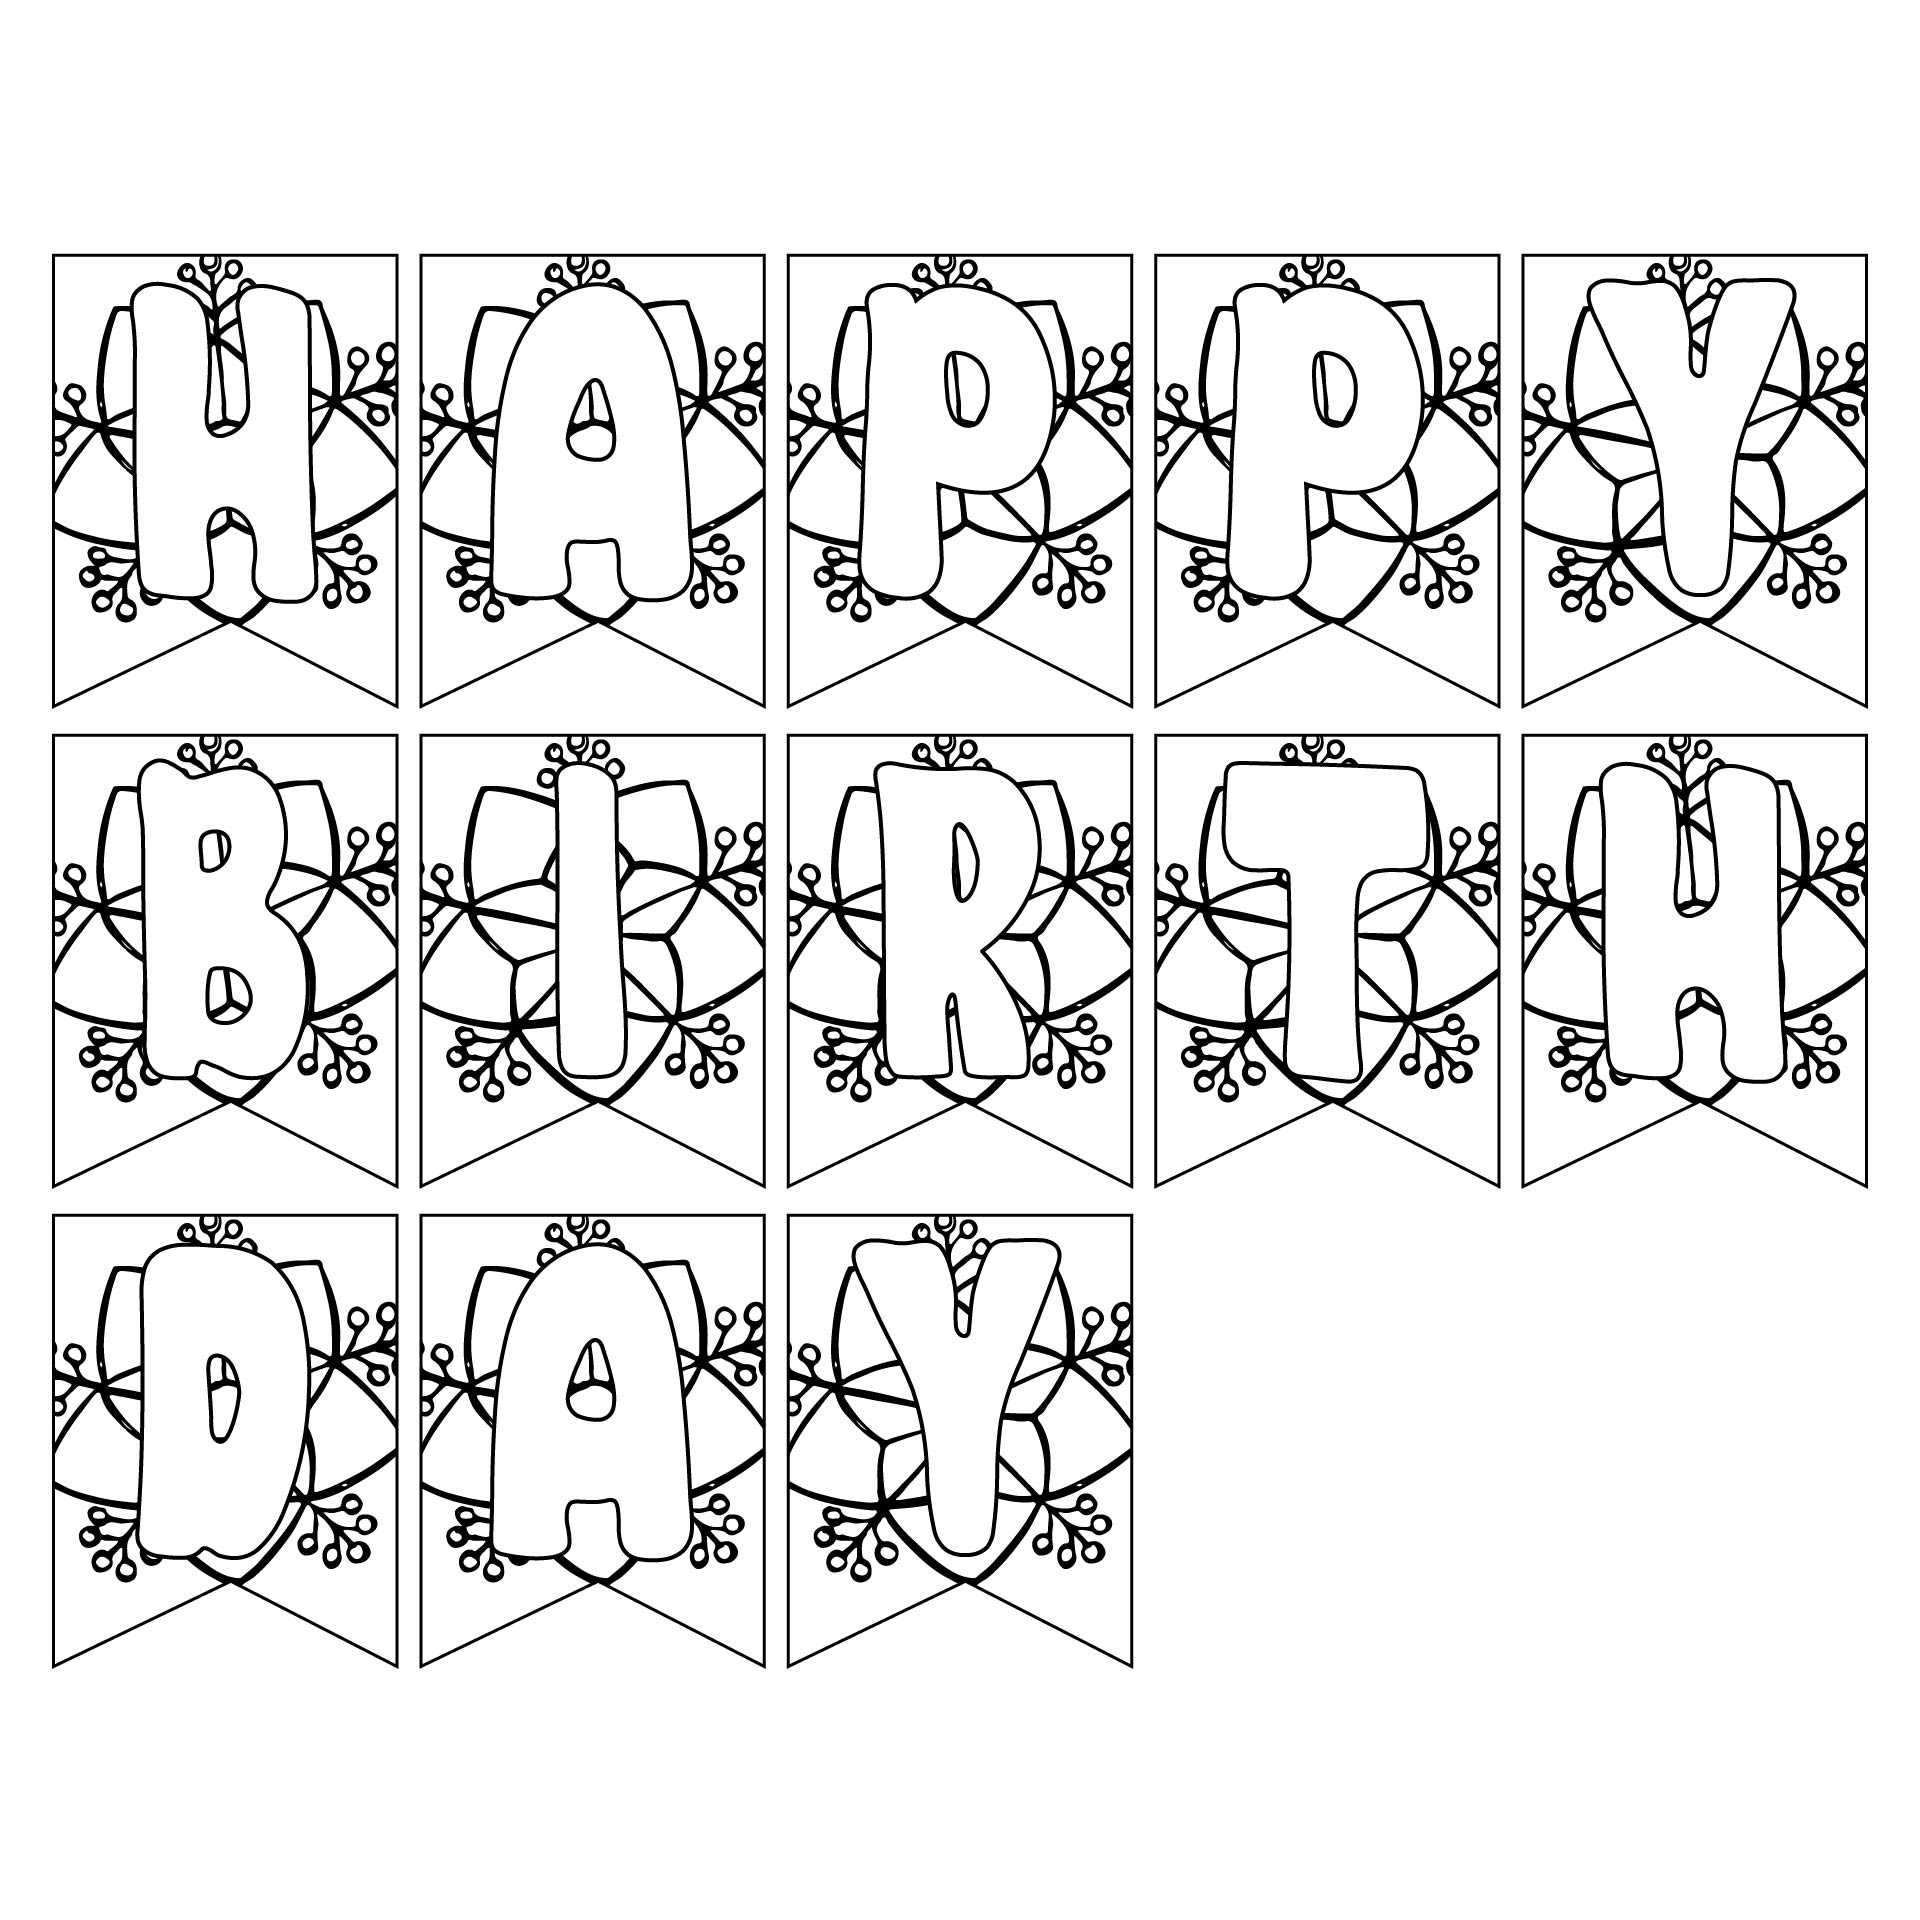 Happy Birthday Banners Printable Template